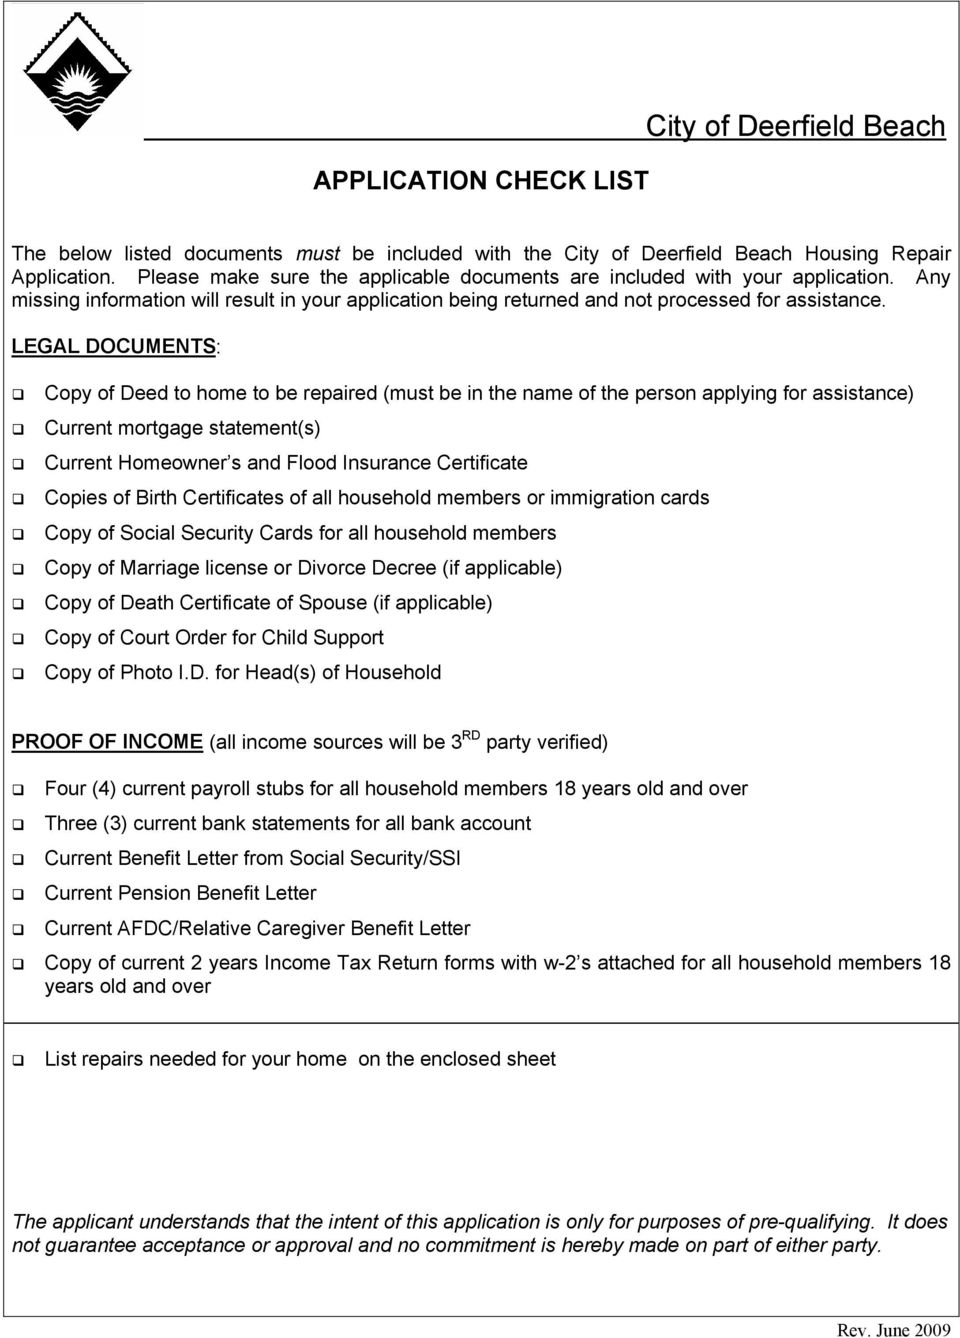 LEGAL DOCUMENTS: Copy of Deed to home to be repaired (must be in the name of the person applying for assistance) Current mortgage statement(s) Current Homeowner s and Flood Insurance Certificate